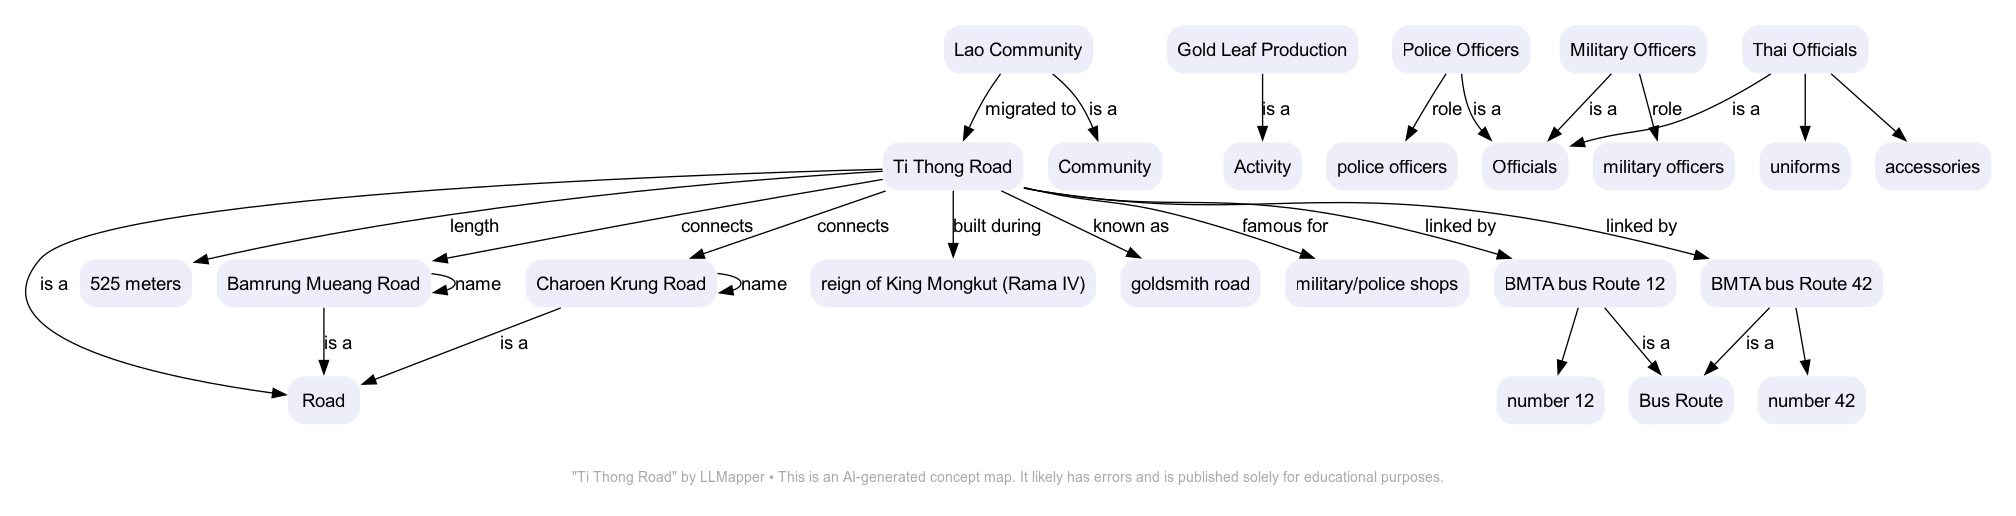 Ti Thong Road - A concept map by LLMapper